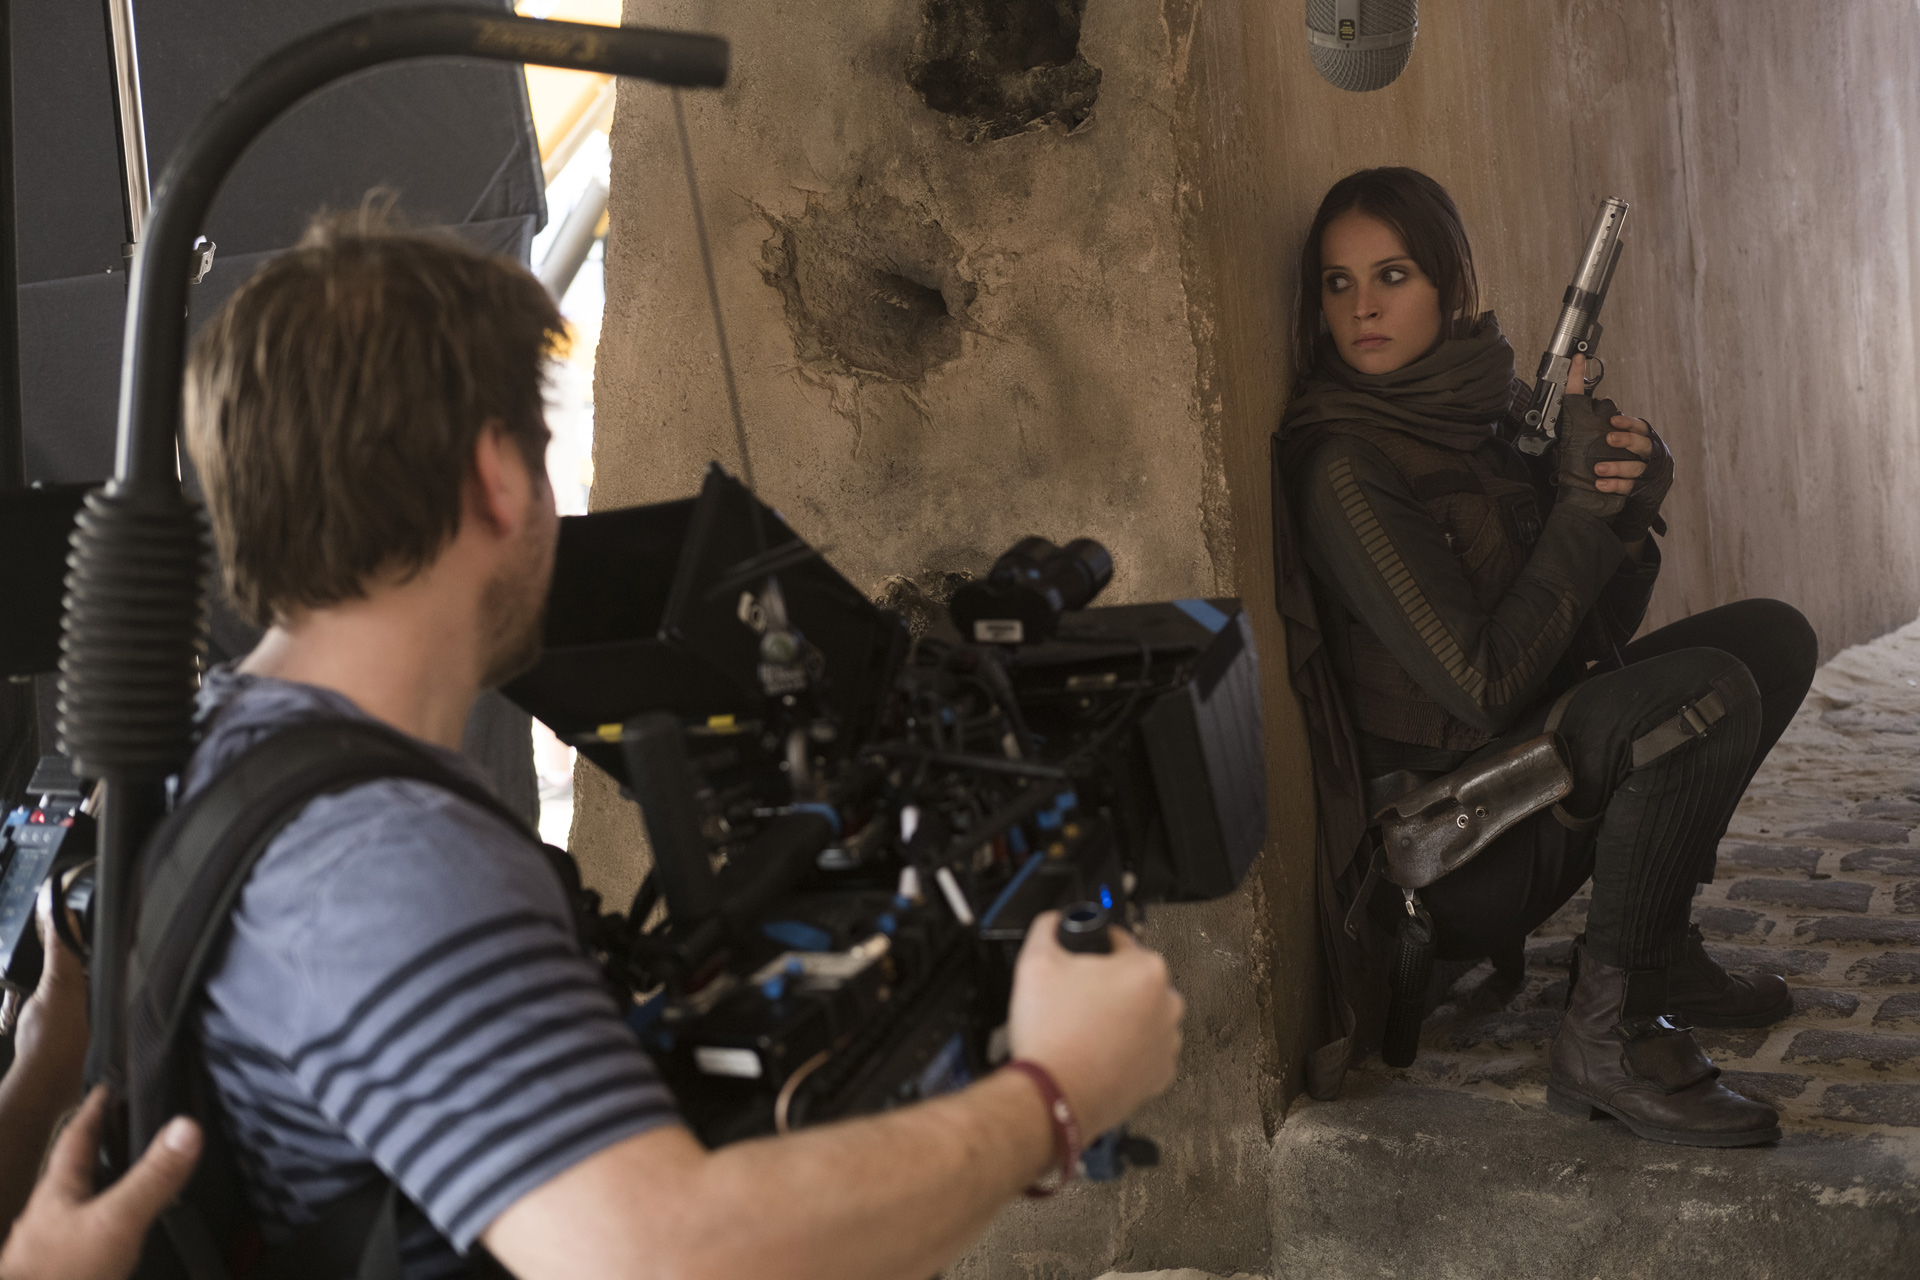 Behind the Scenes - Rogue One